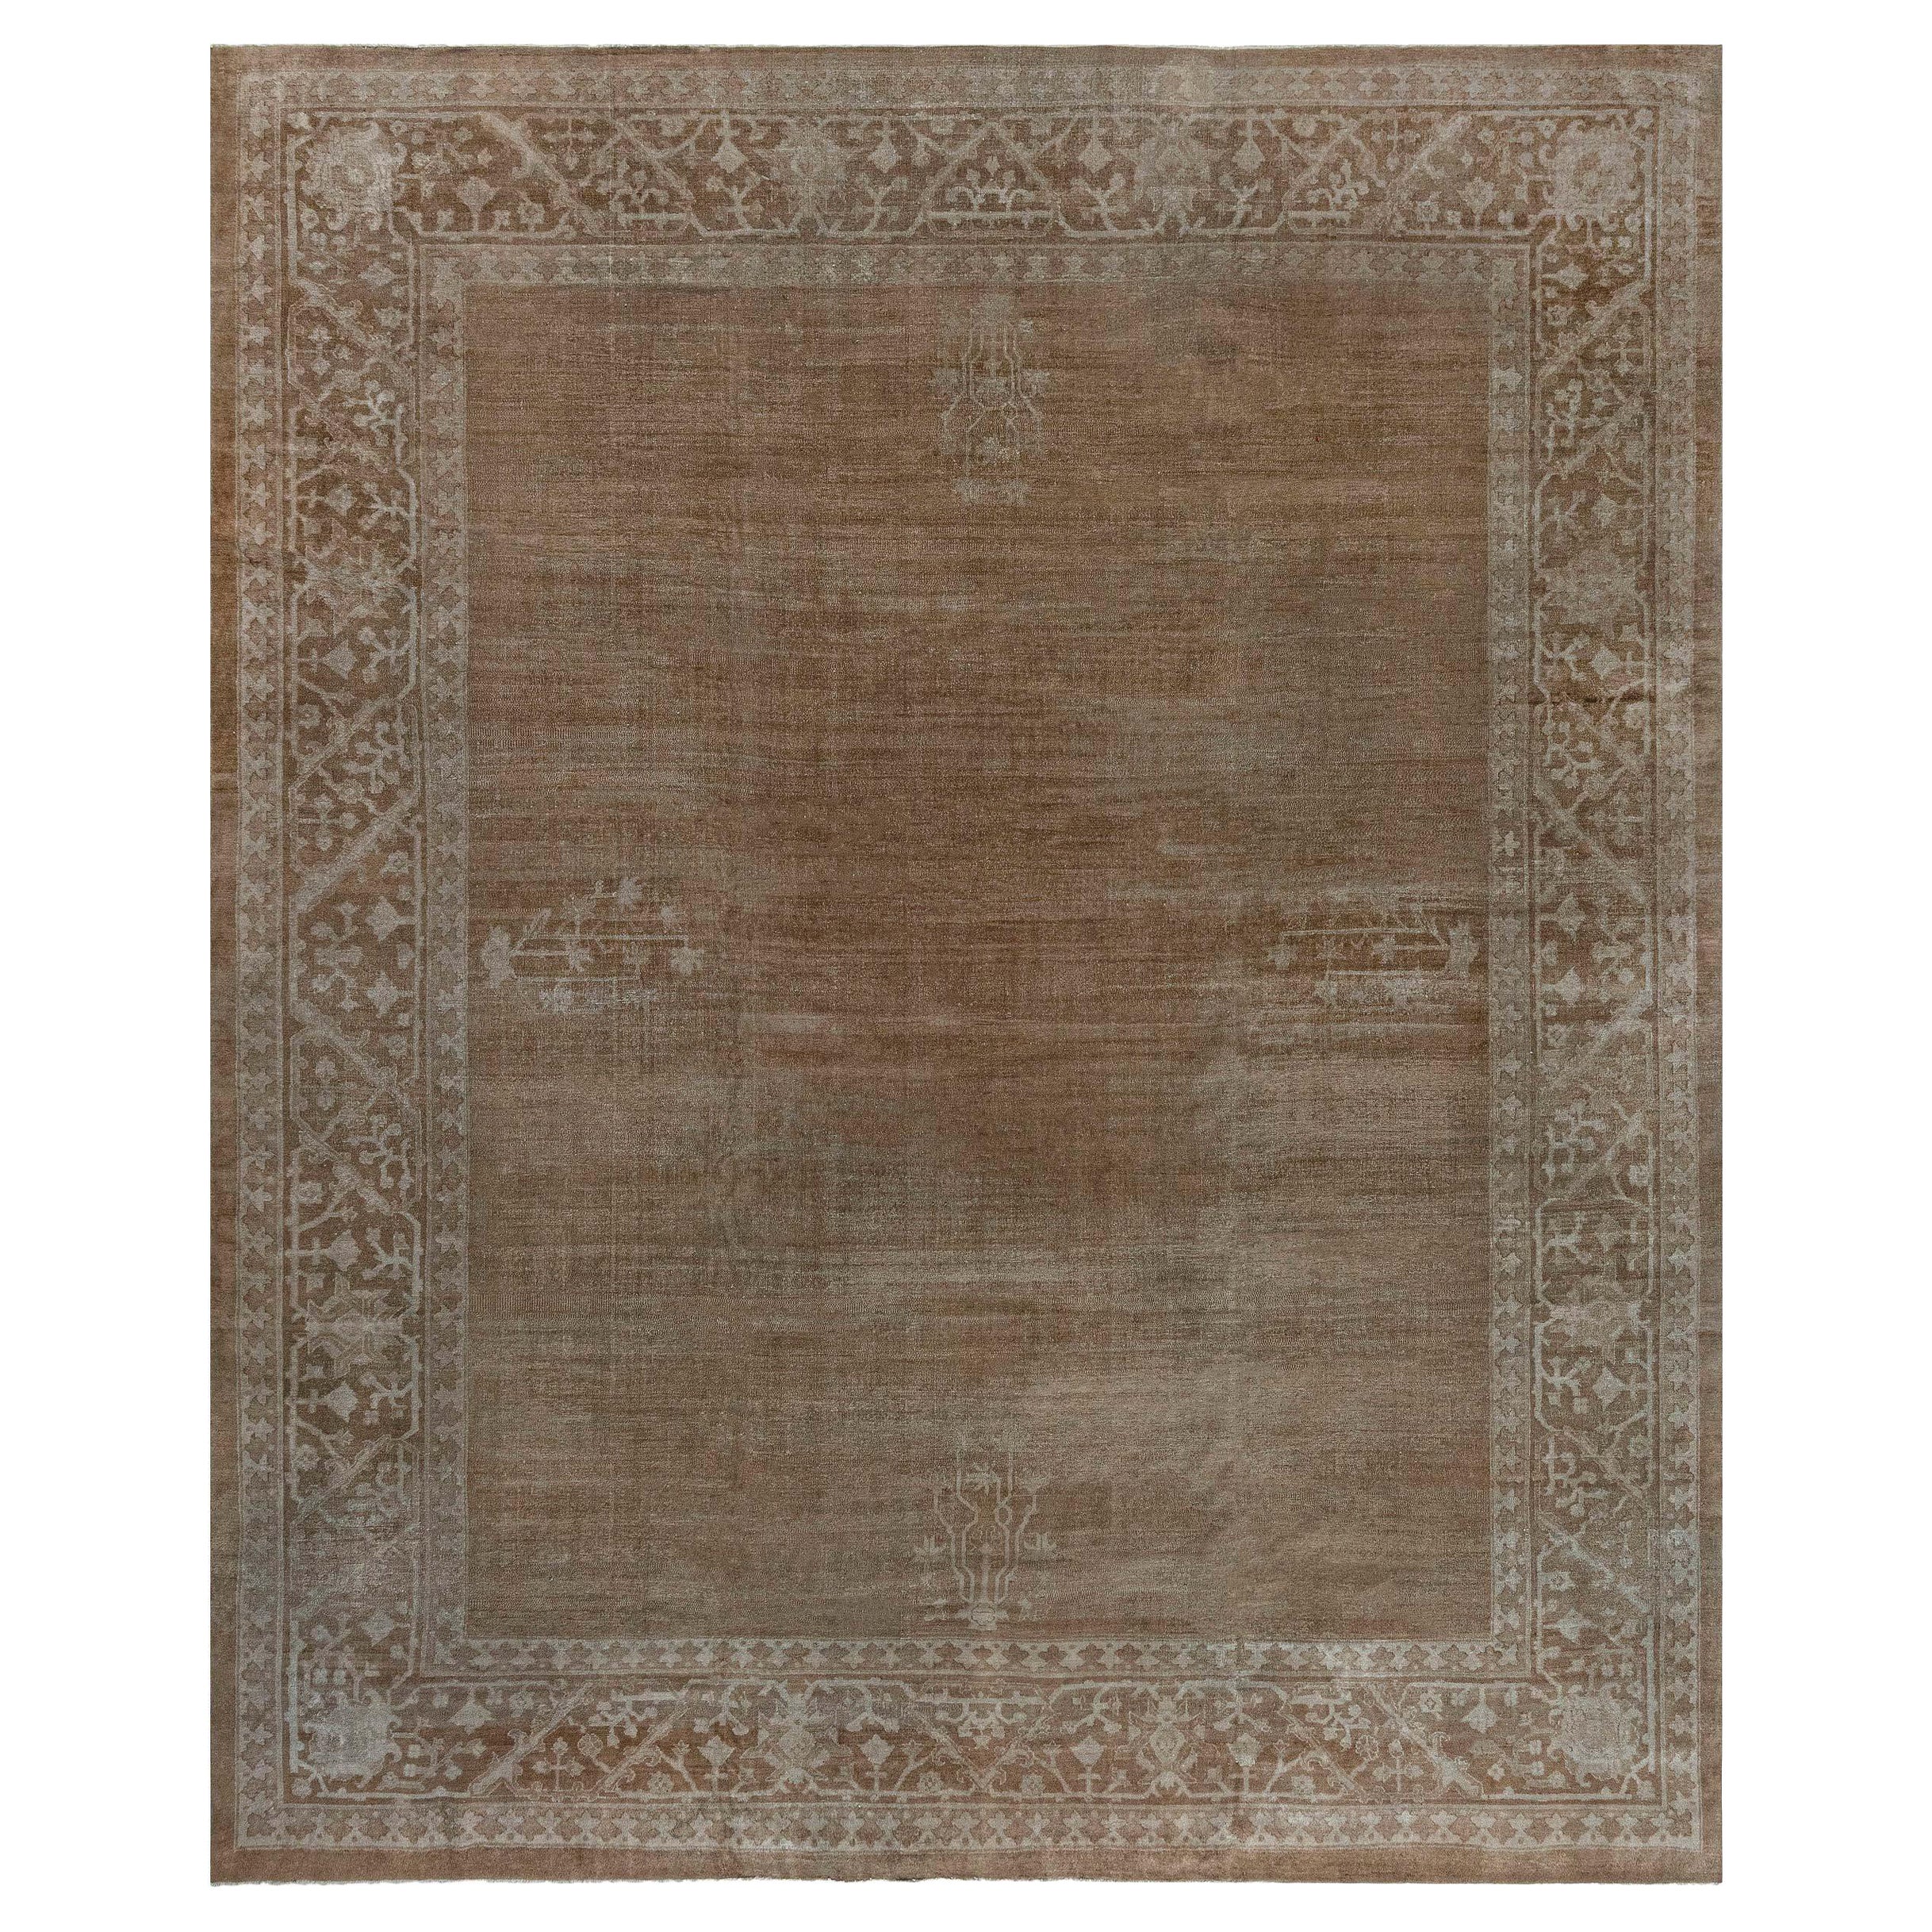 Authentic Indian Amritsar Abstract Wool Rug